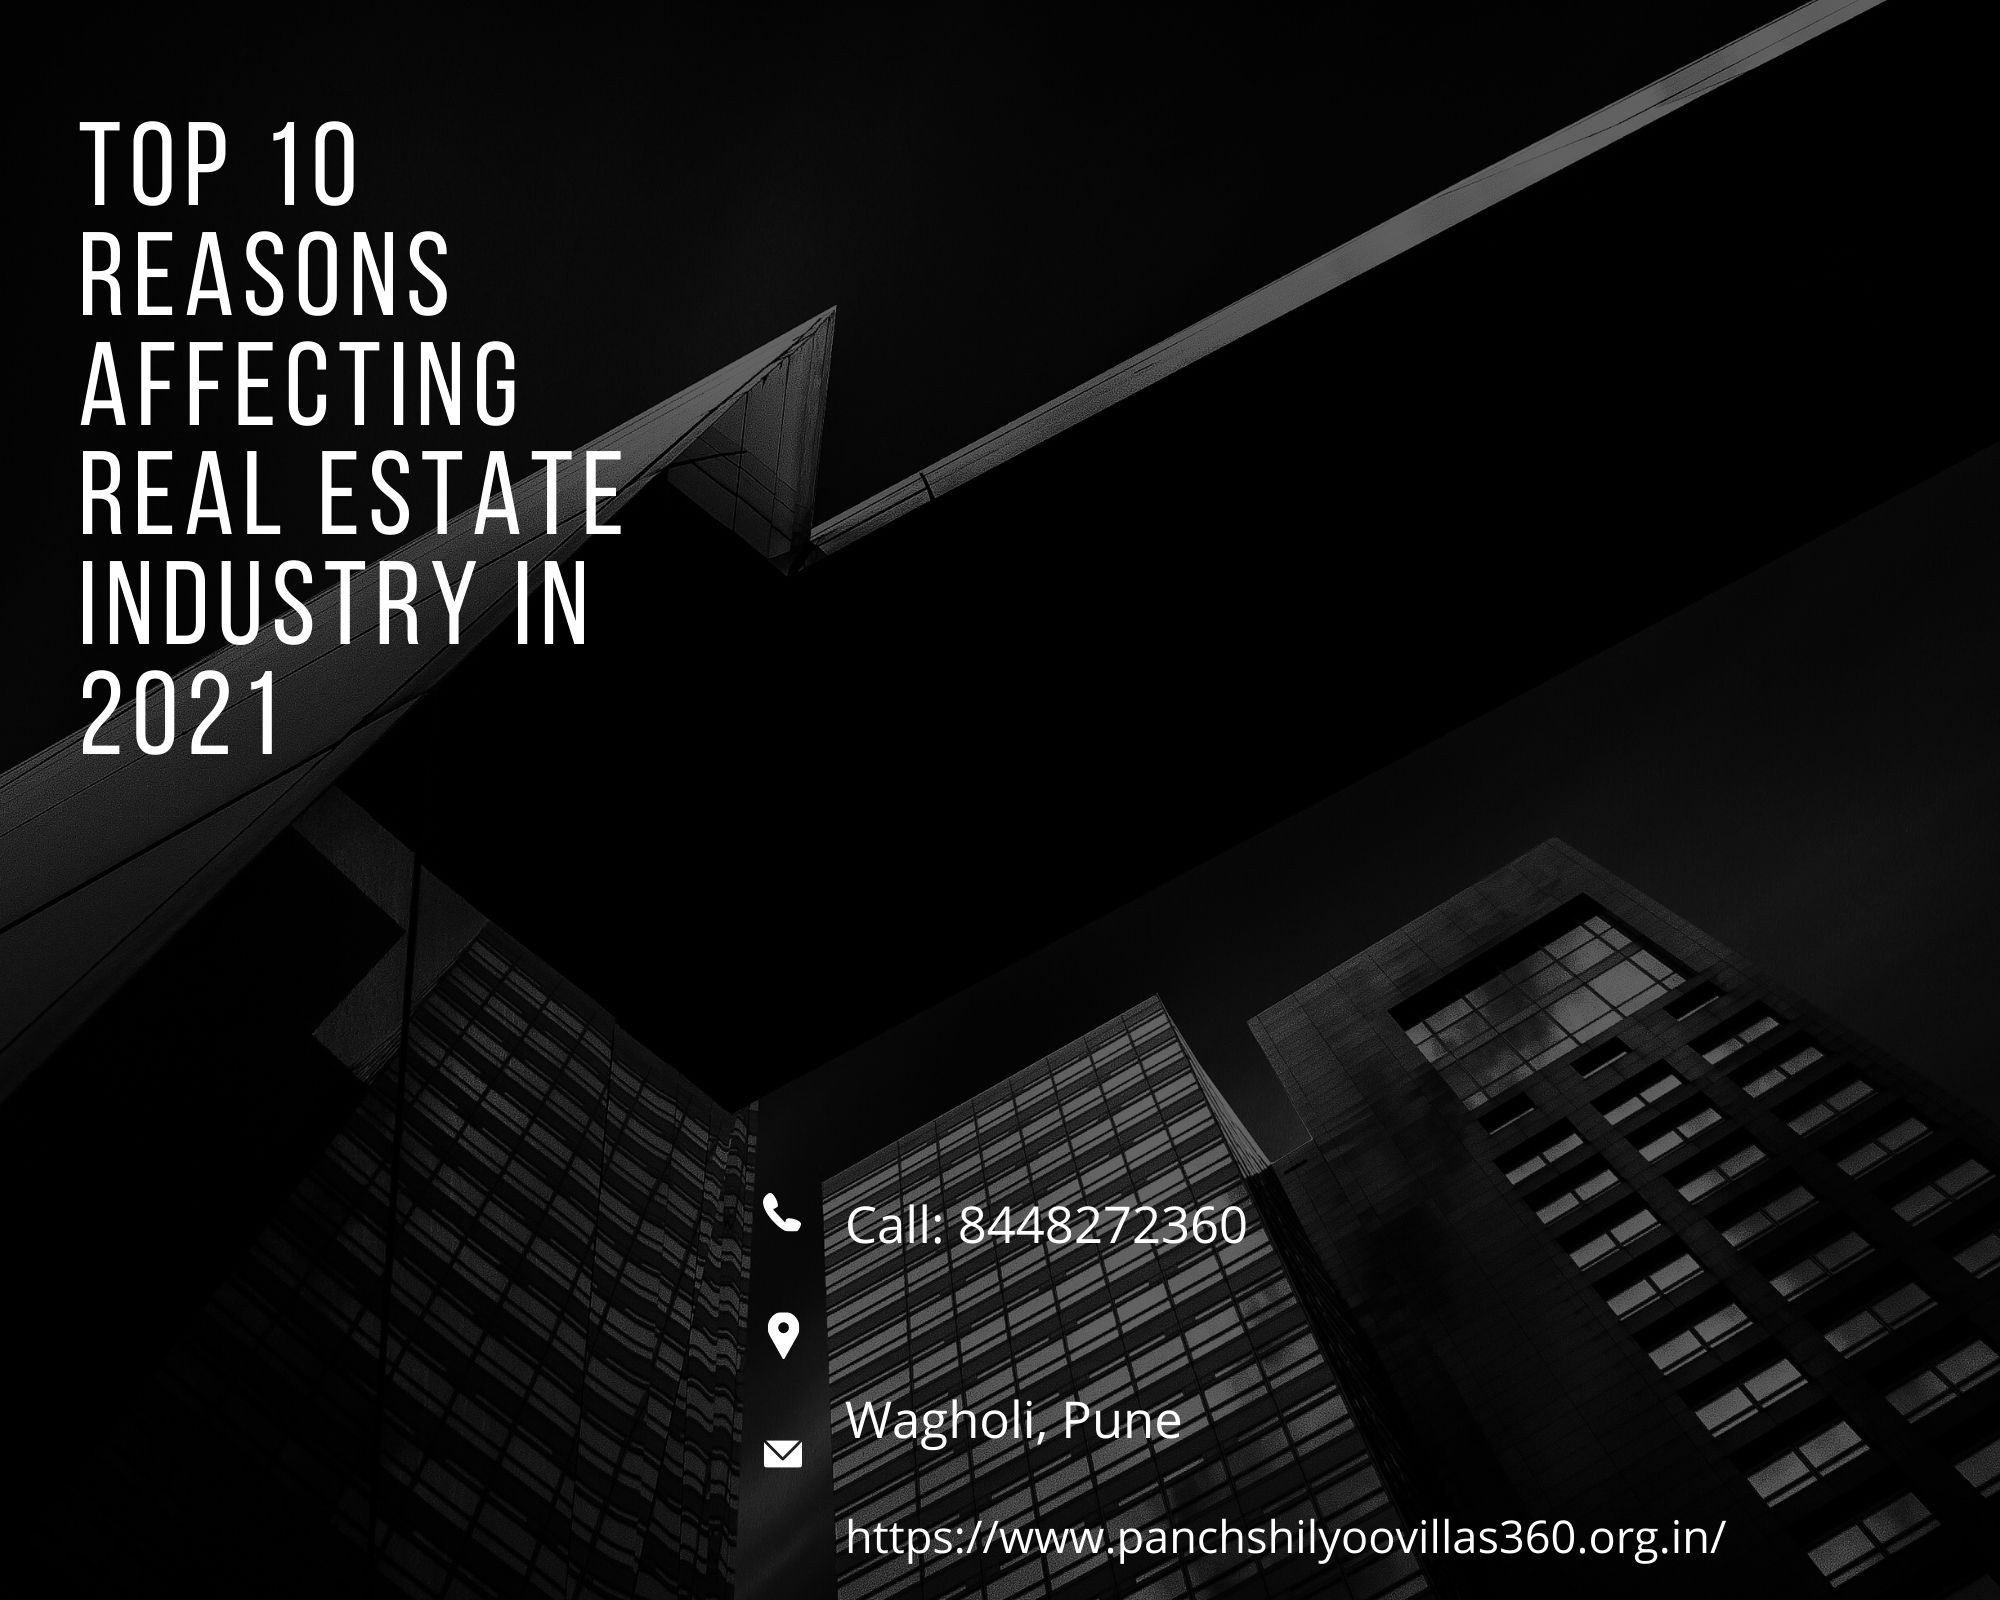 Top 10 reasons affecting real estate industry in 2021